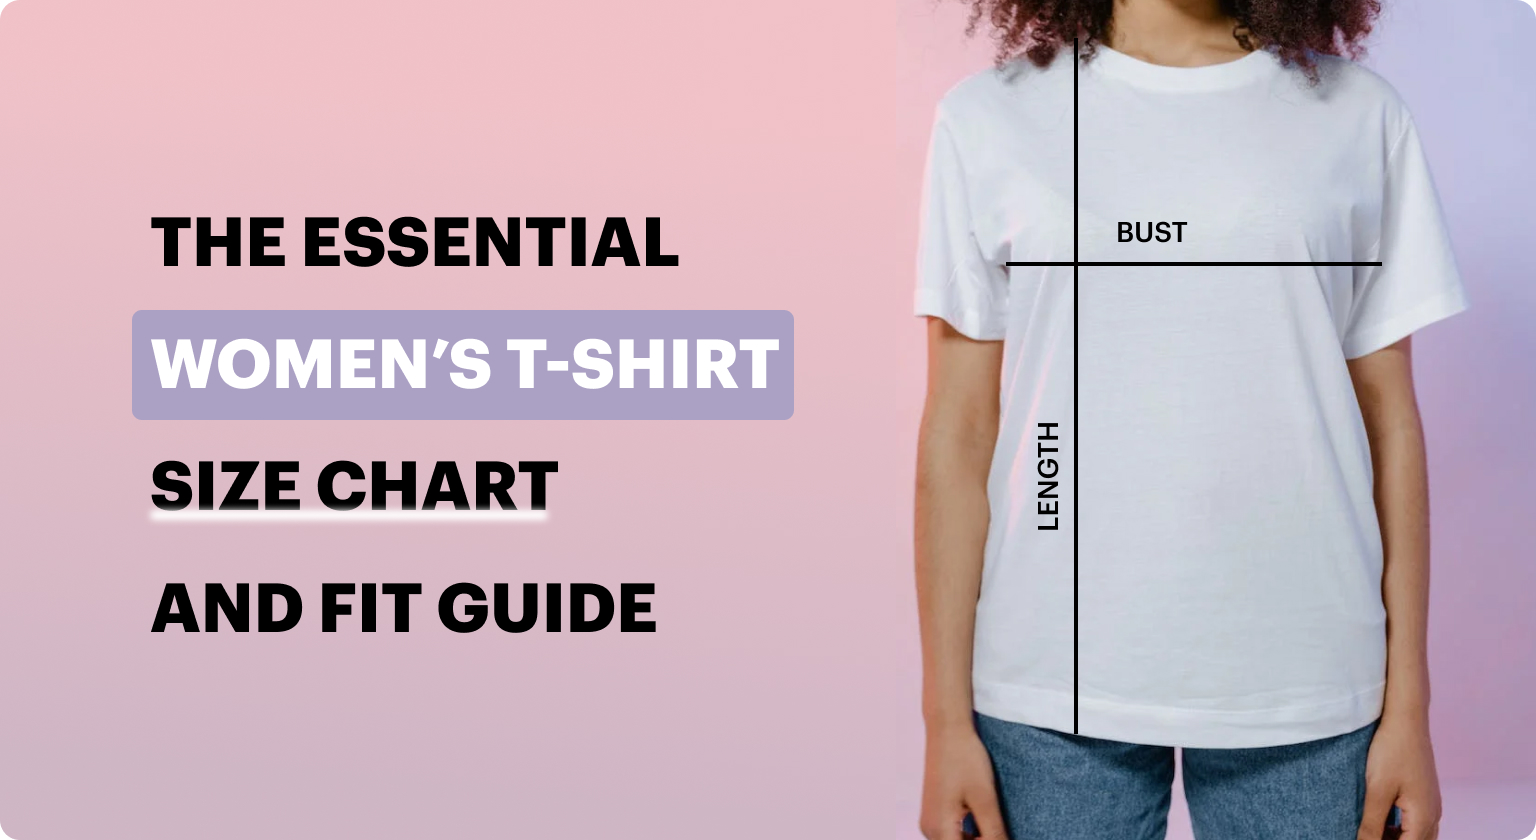 https://images.ctfassets.net/c8luxa5v52ih/2qY7nBgJs6AmycypOApKfY/f8de70fcd45cfc560d7ace572e68f85c/The_Essential_Women___s_T-Shirt_Size_Chart_and_Fit_Guide.jpg